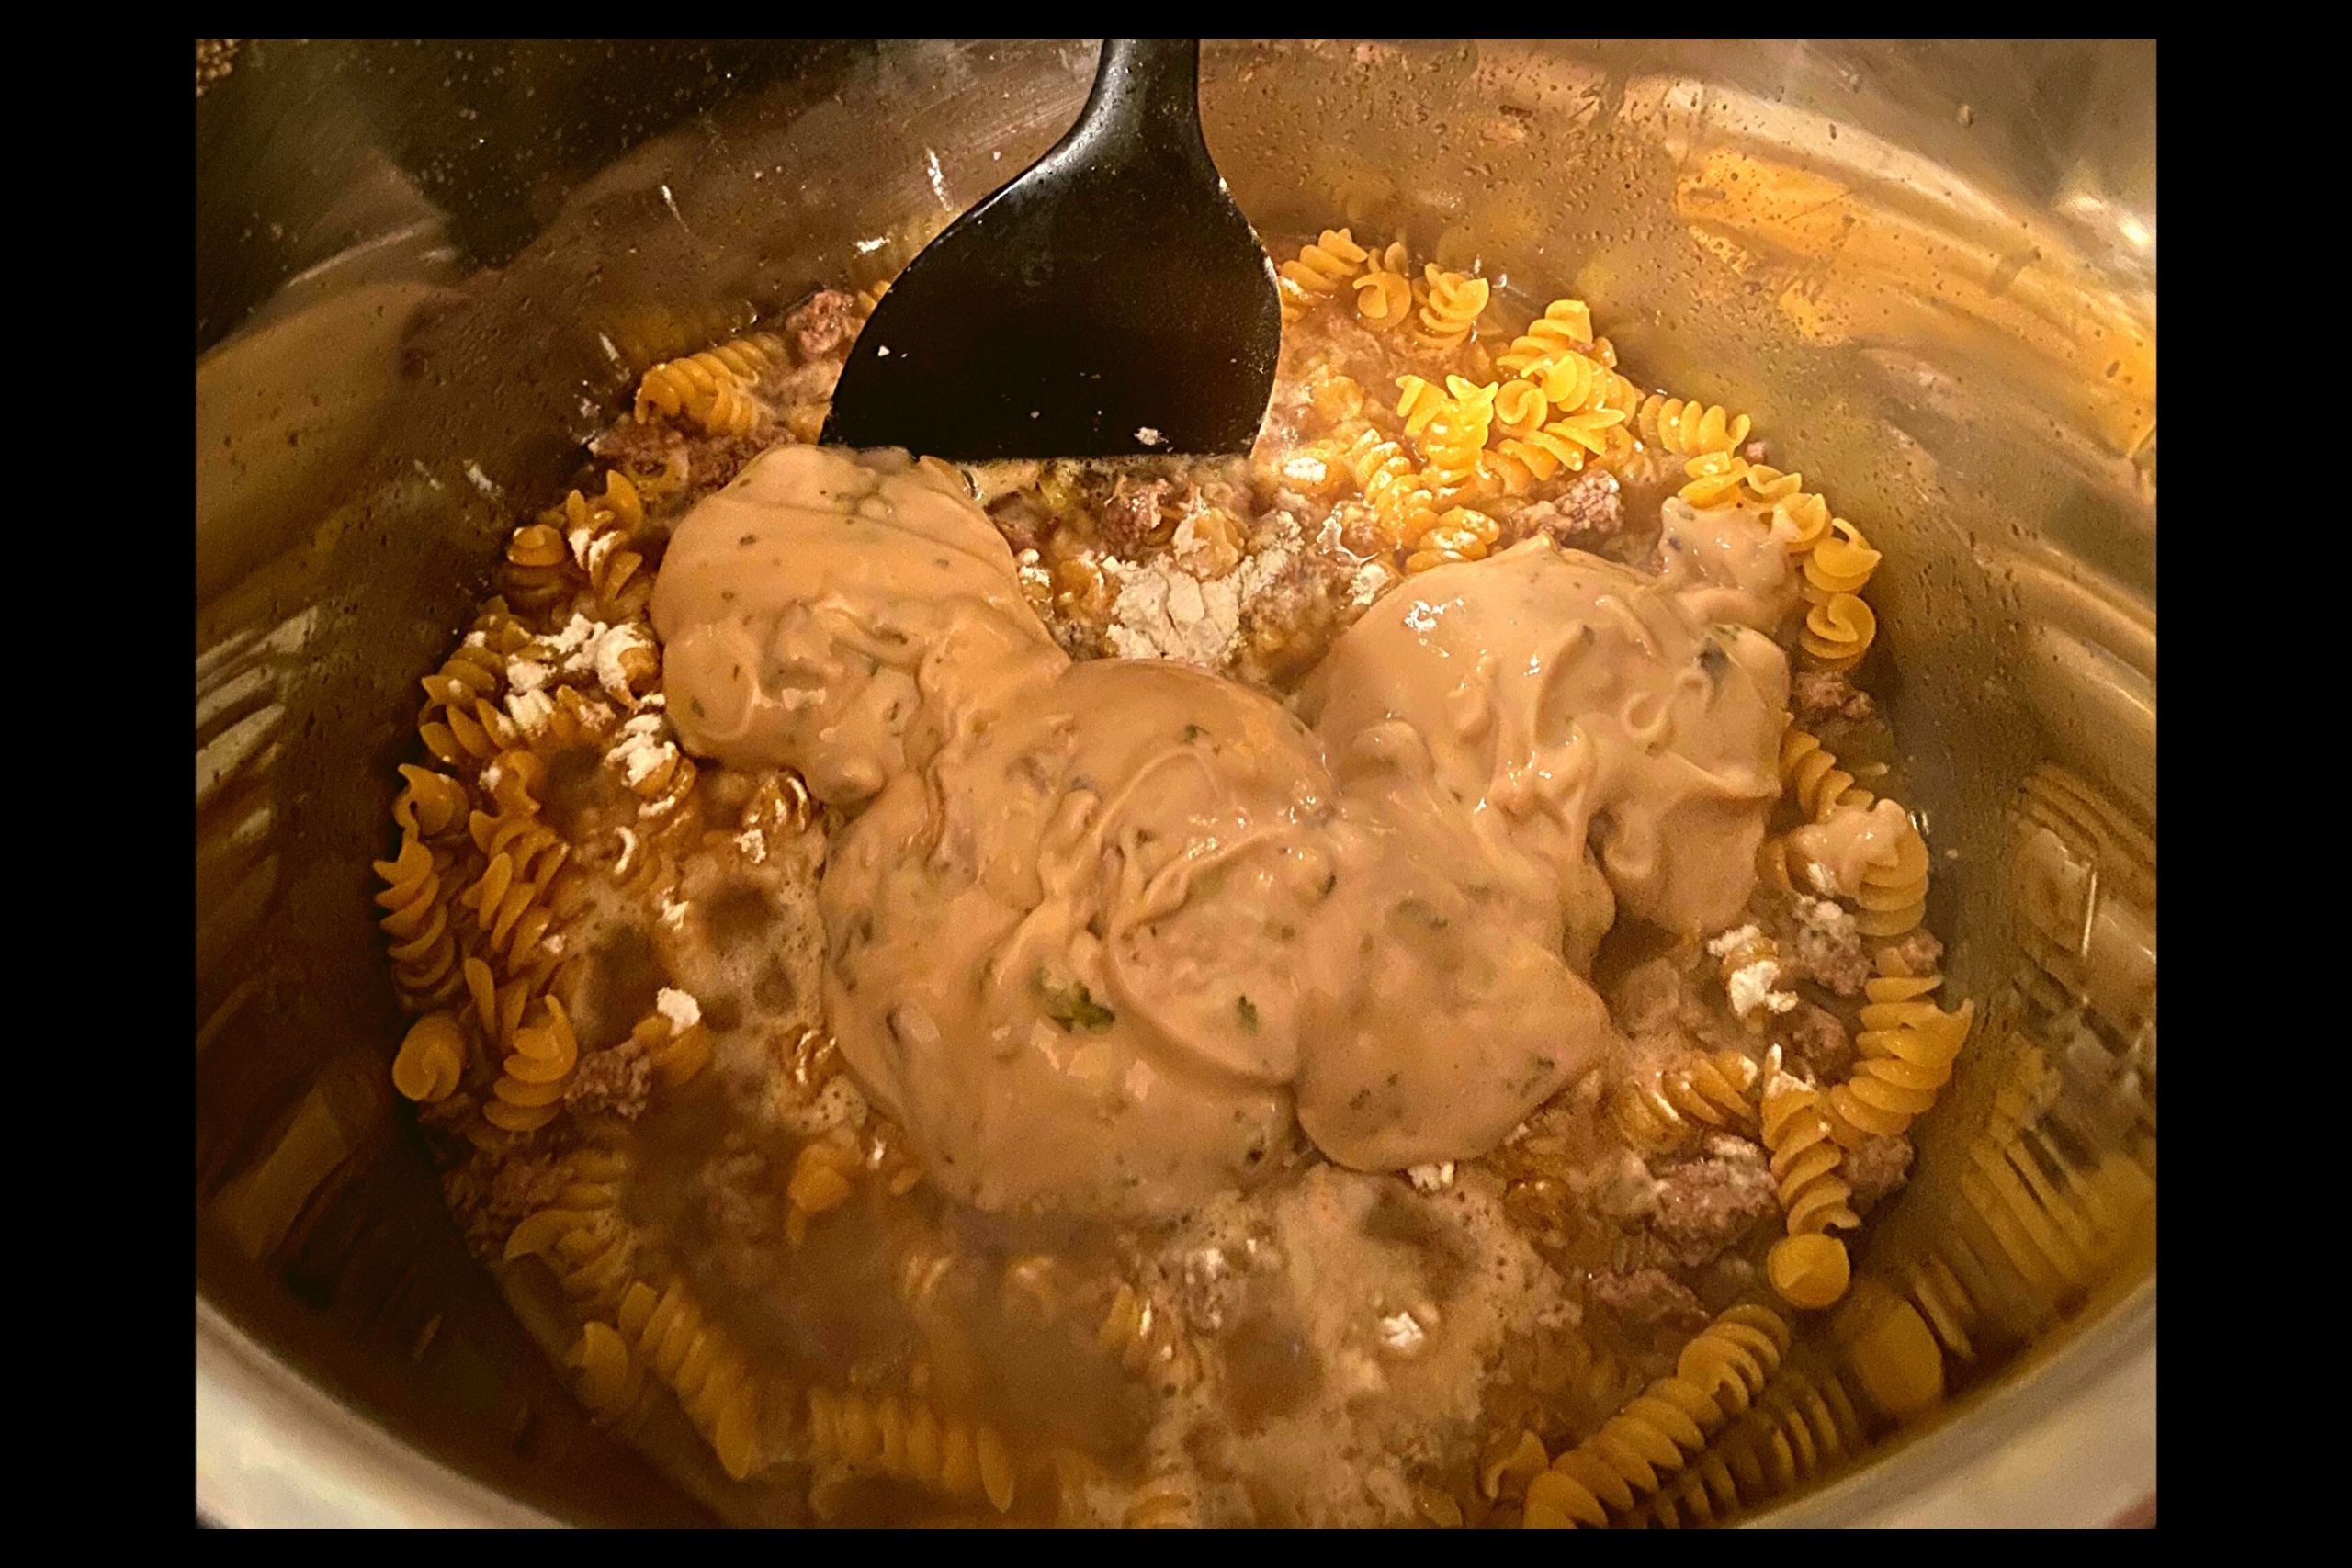 Instant Pot filled with ground meat, beef broth, rotini noodles, flour, and cream of mushroom and roasted garlic